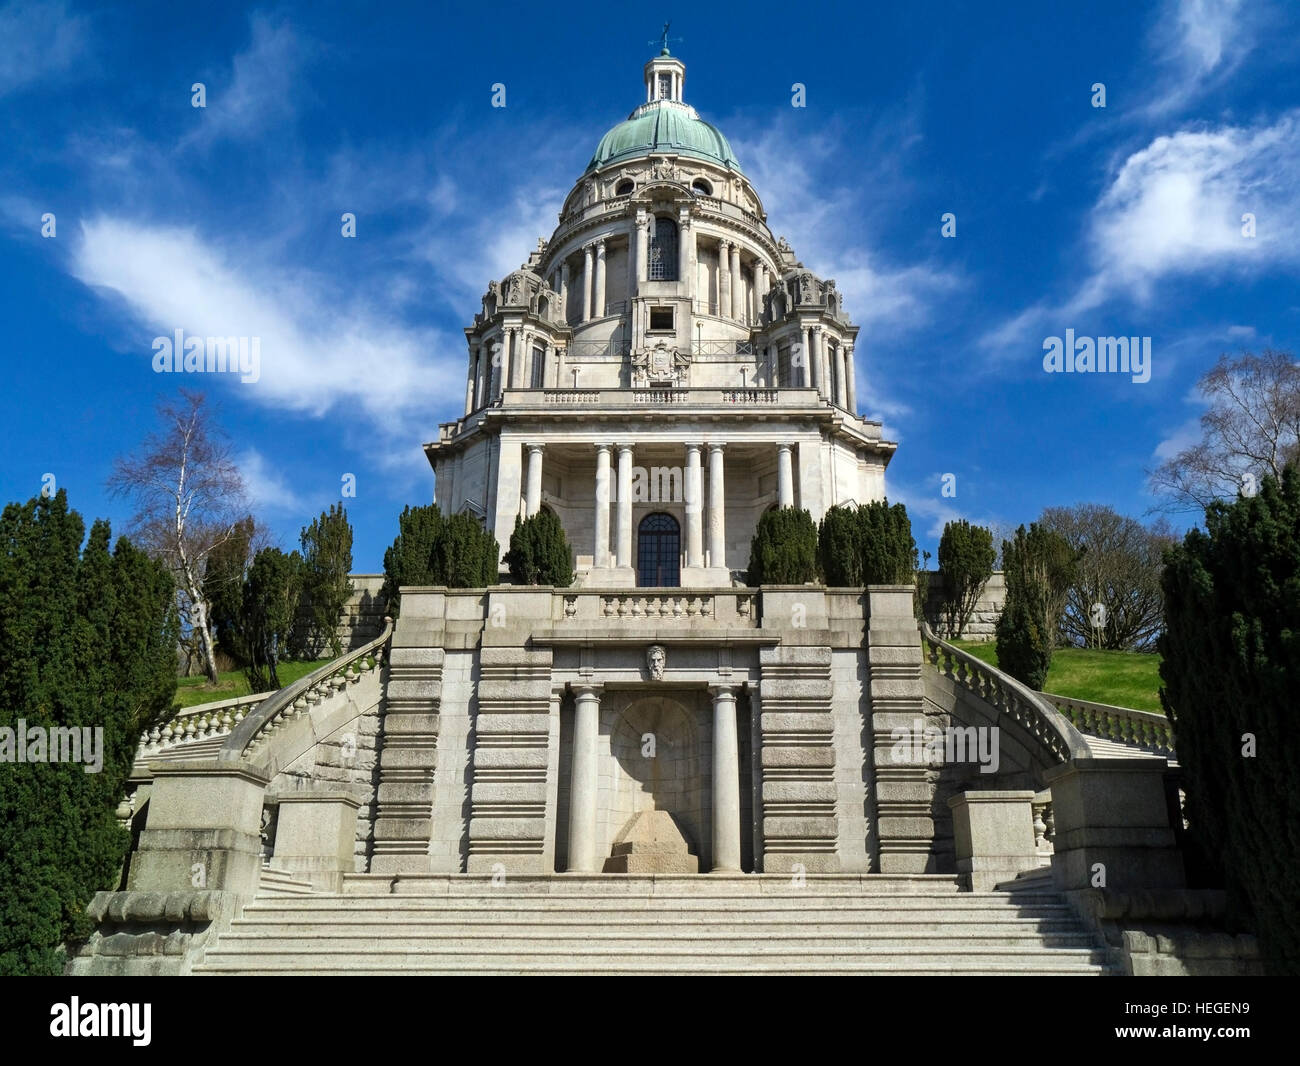 The Ashton Memorial is a folly in Williamson Park in the city of Lancaster in northwest England. Stock Photo